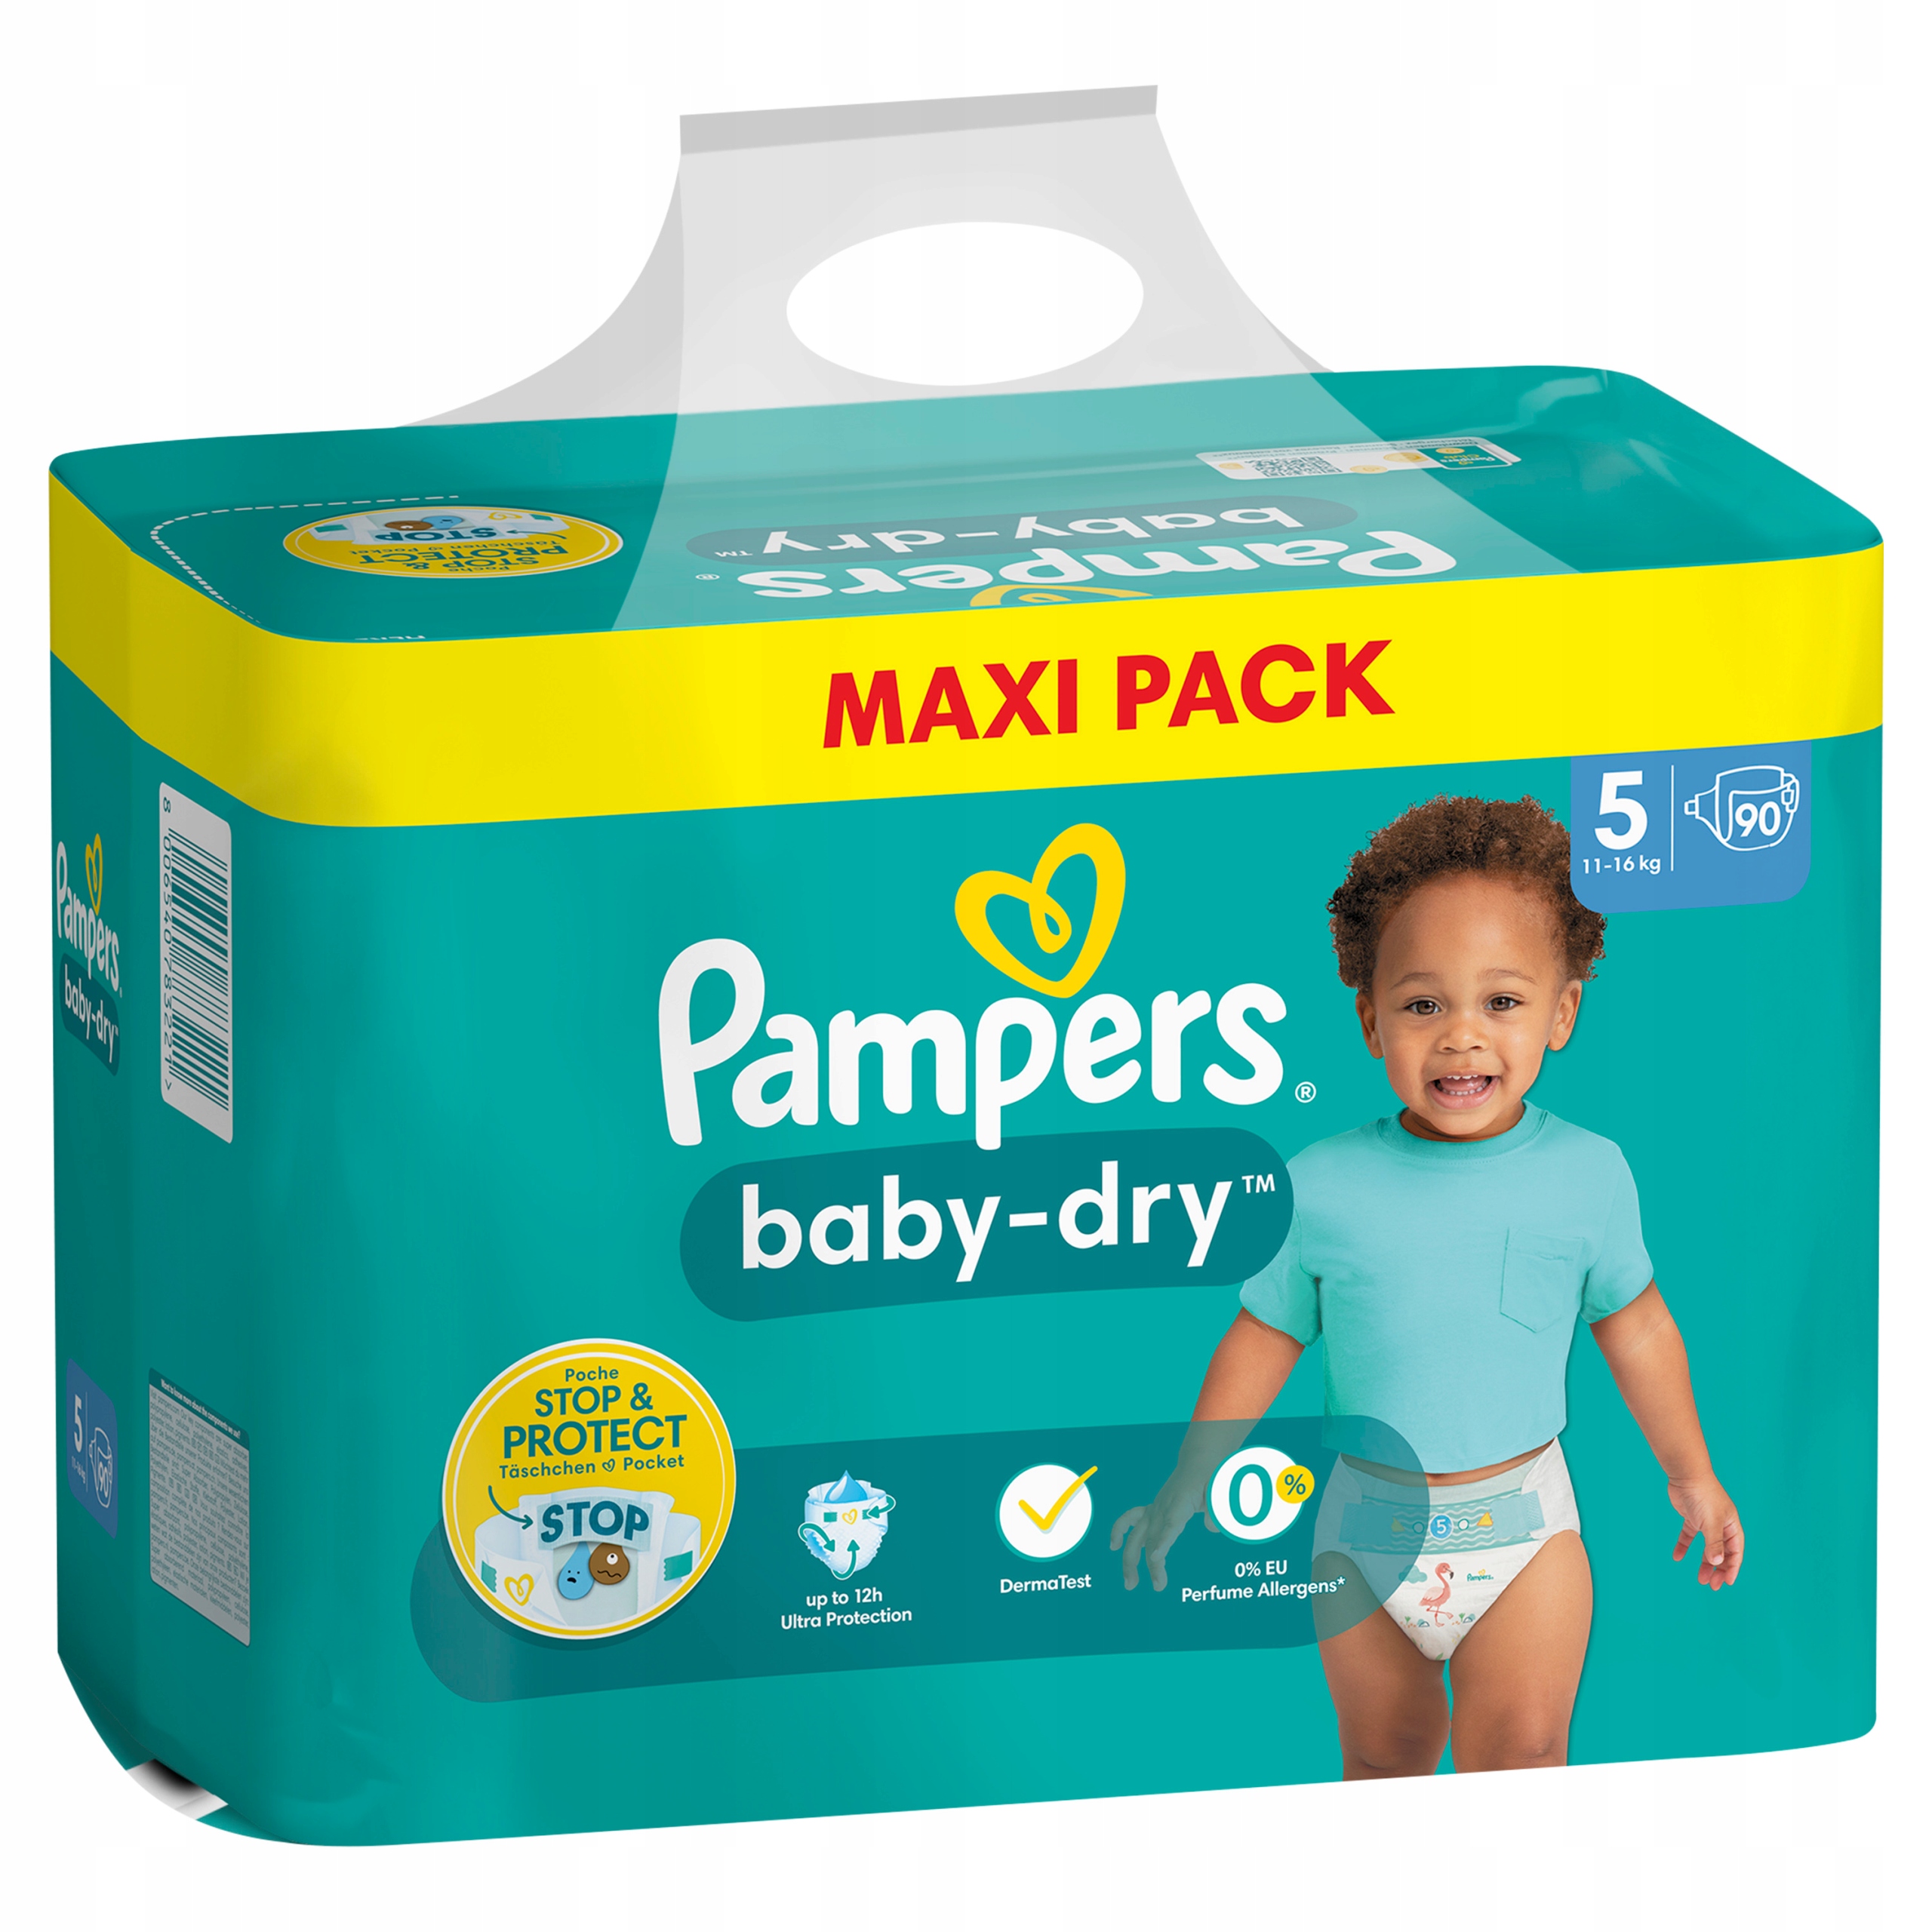 active baby premium care pampers